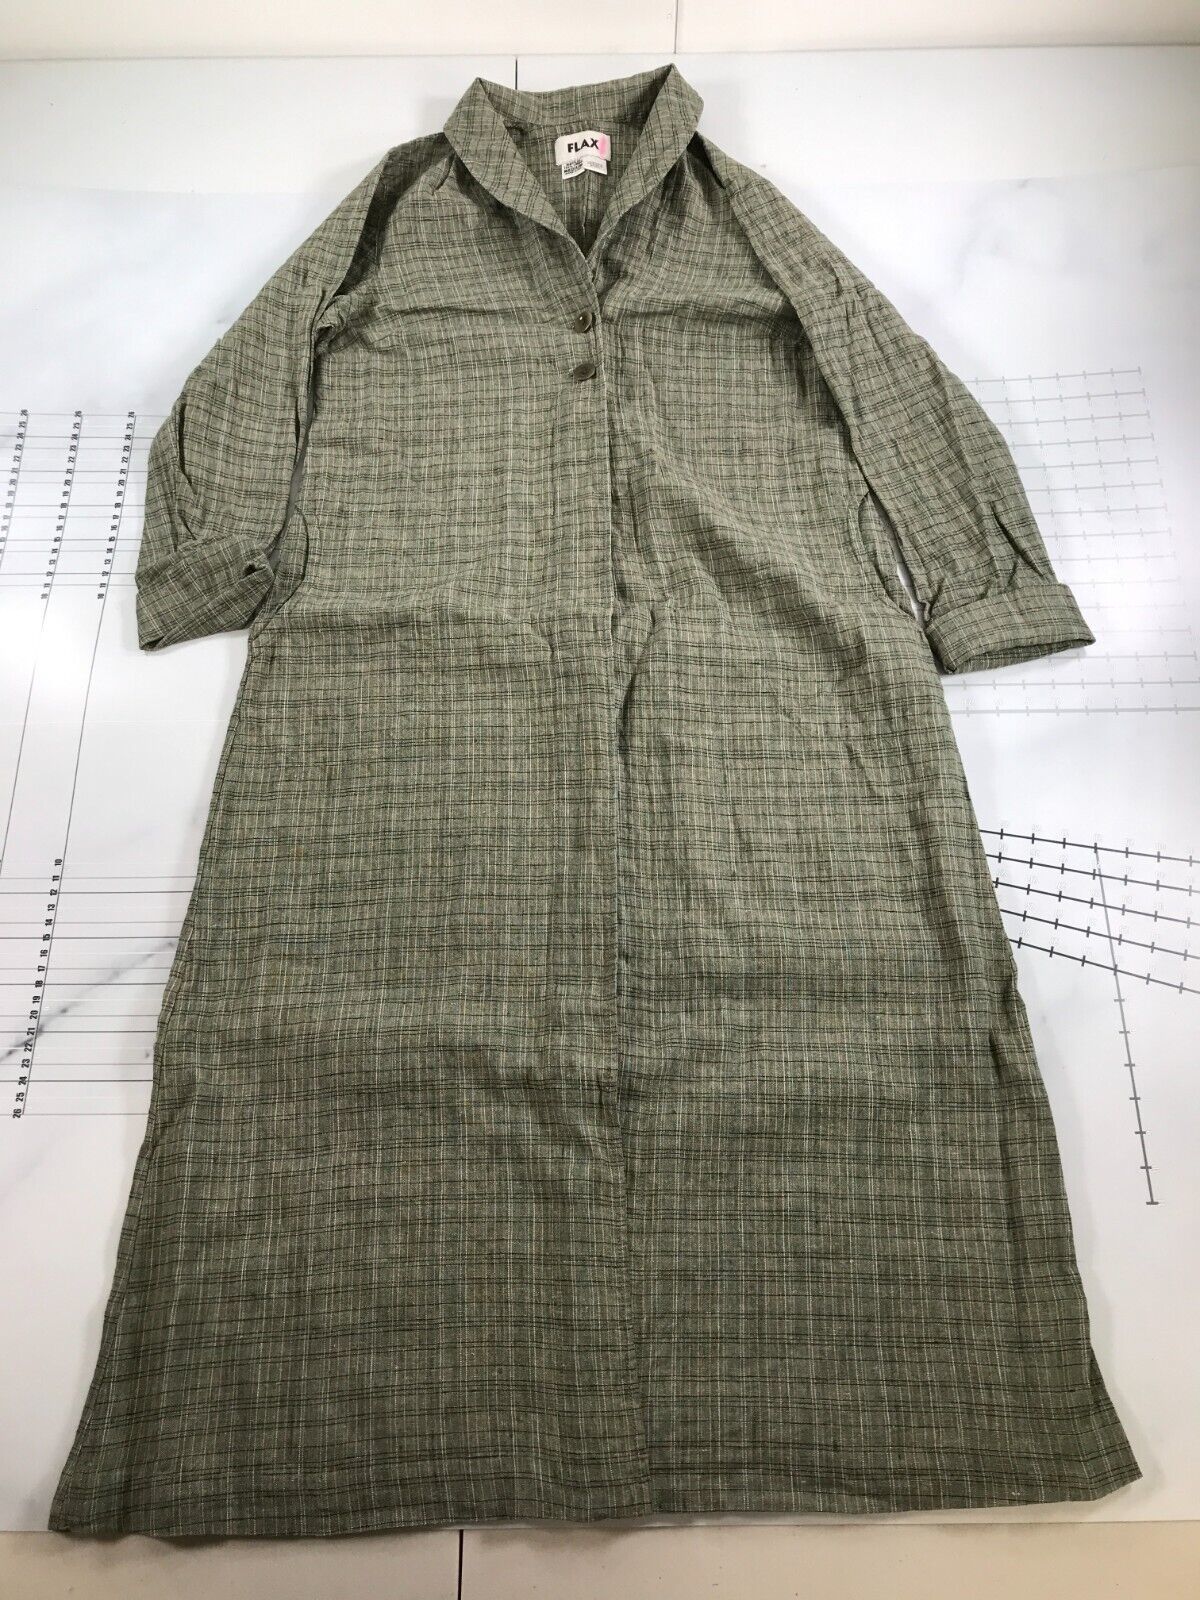 Primary image for FLAX Tent Dress Womens Medium Green Checkered Plaid Long Sleeve Shawl Collar